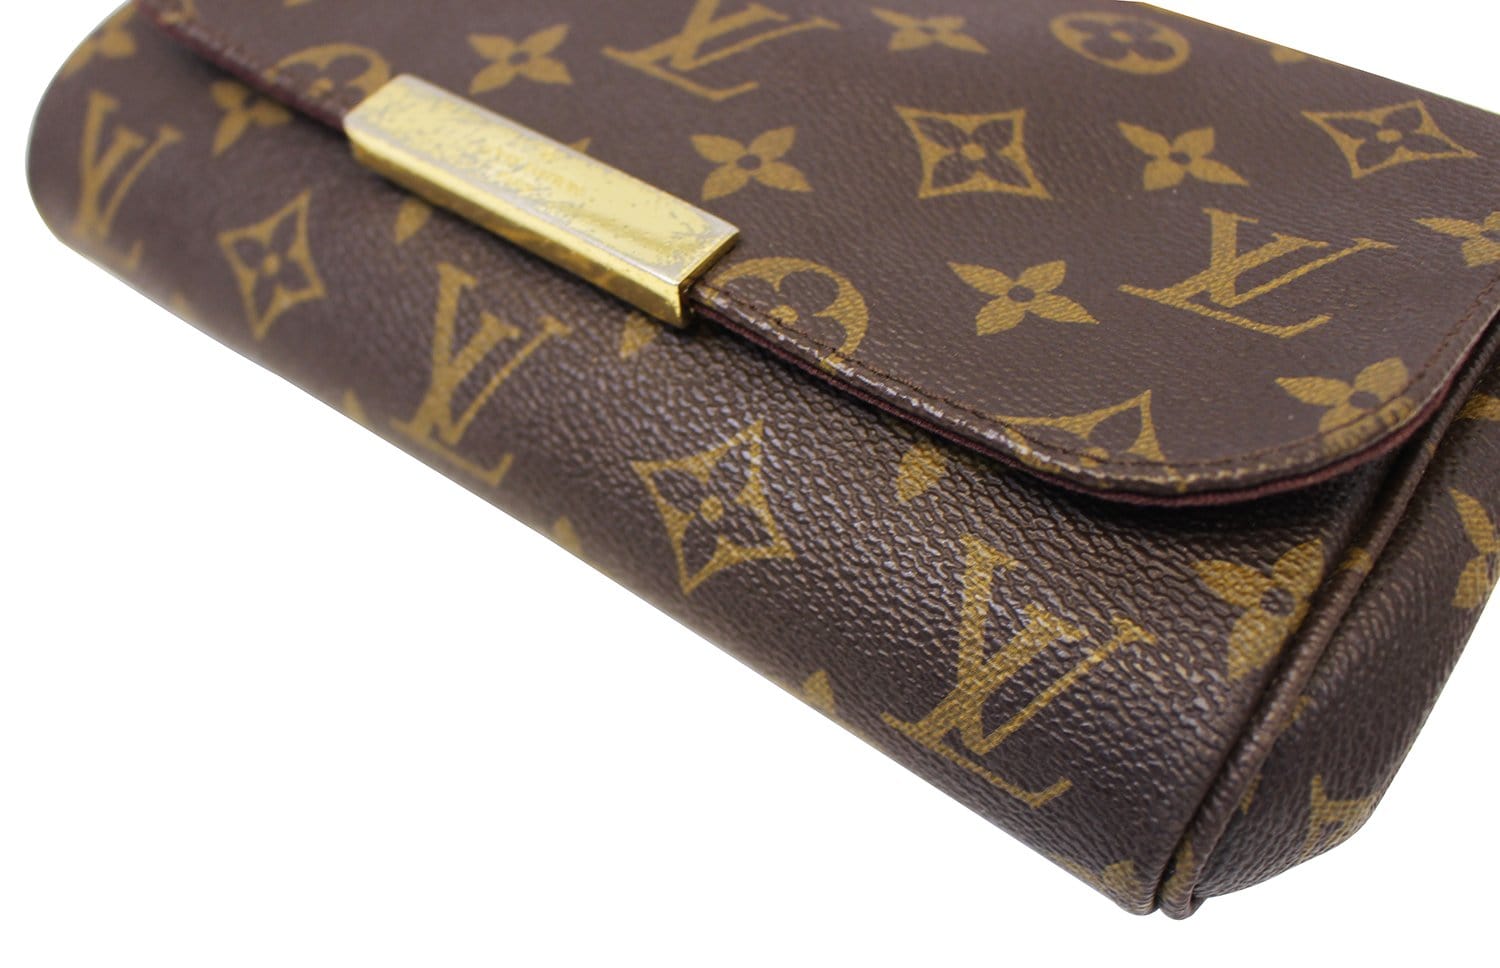 Louis Vuitton, Bags, Louis Vuitton Classic Small Purse Gently Used